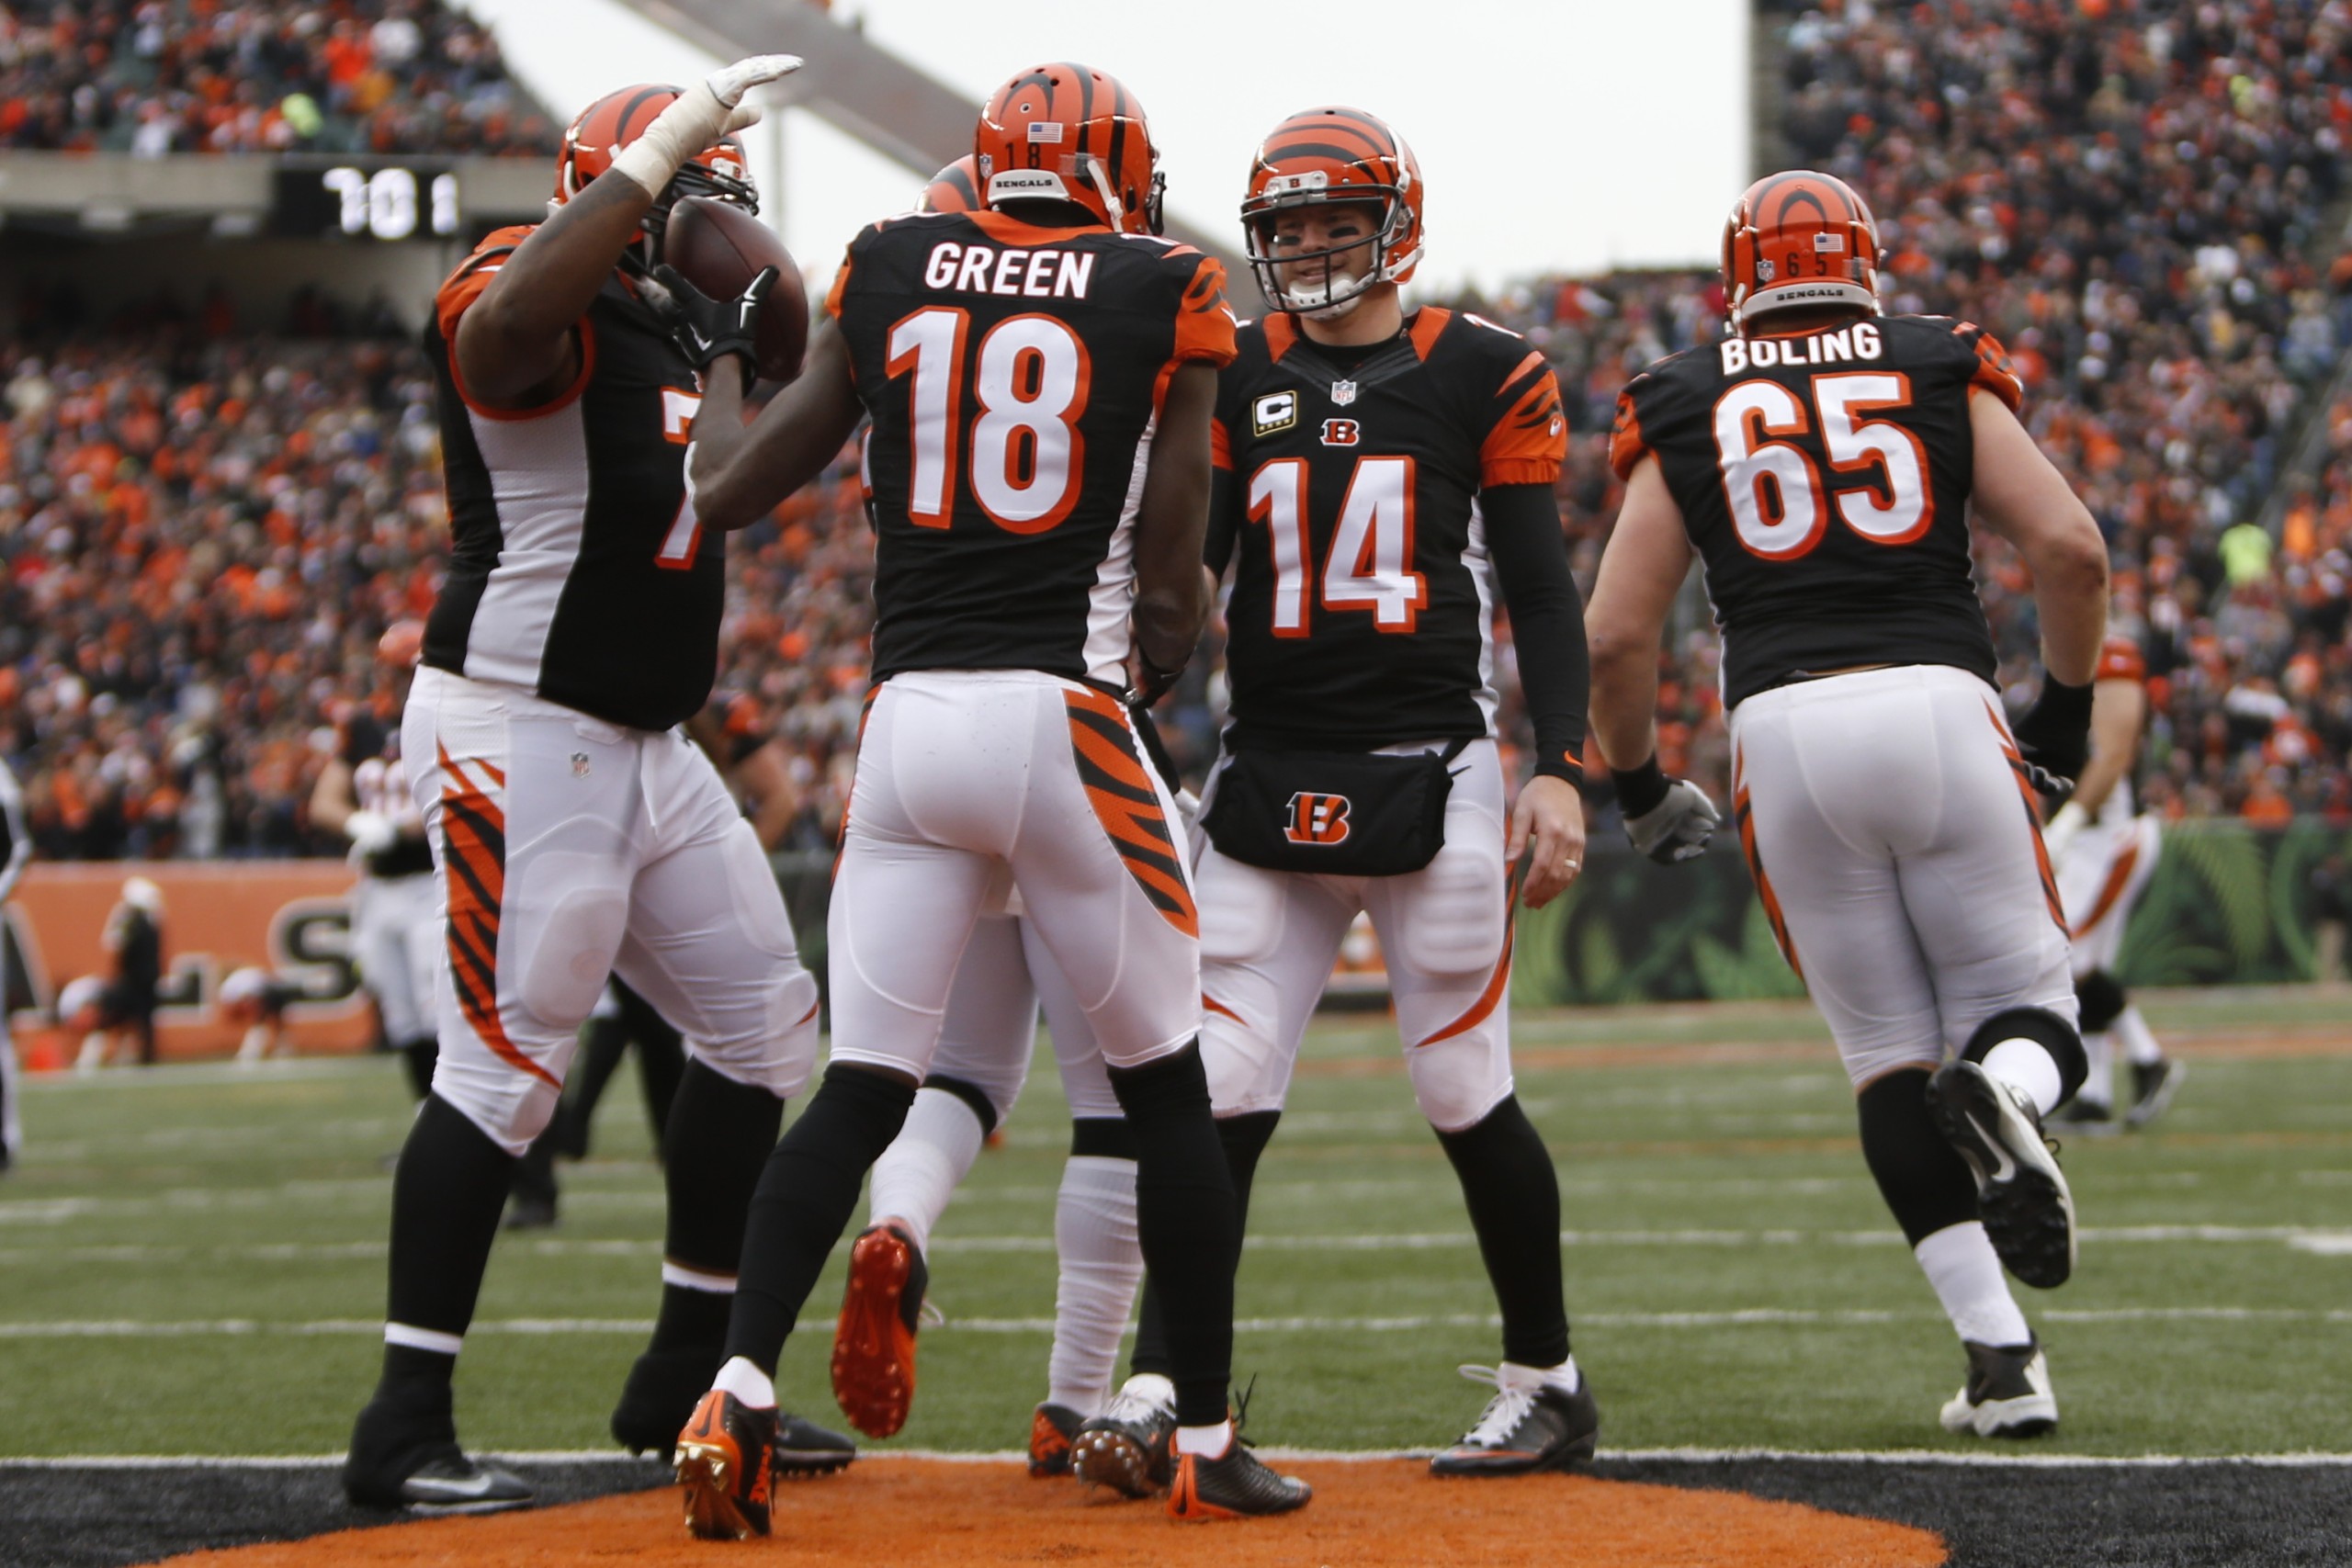 Cincinnati Bengals wide receiver A.J. Green (18) celebrates with quarterback Andy Dalton (14) after scoring a touchdown in the second half of an NFL football game against the St. Louis Rams, Sunday, Nov. 29, 2015, in Cincinnati. The Bengals won 31-7. (AP Photo/Frank Victores)